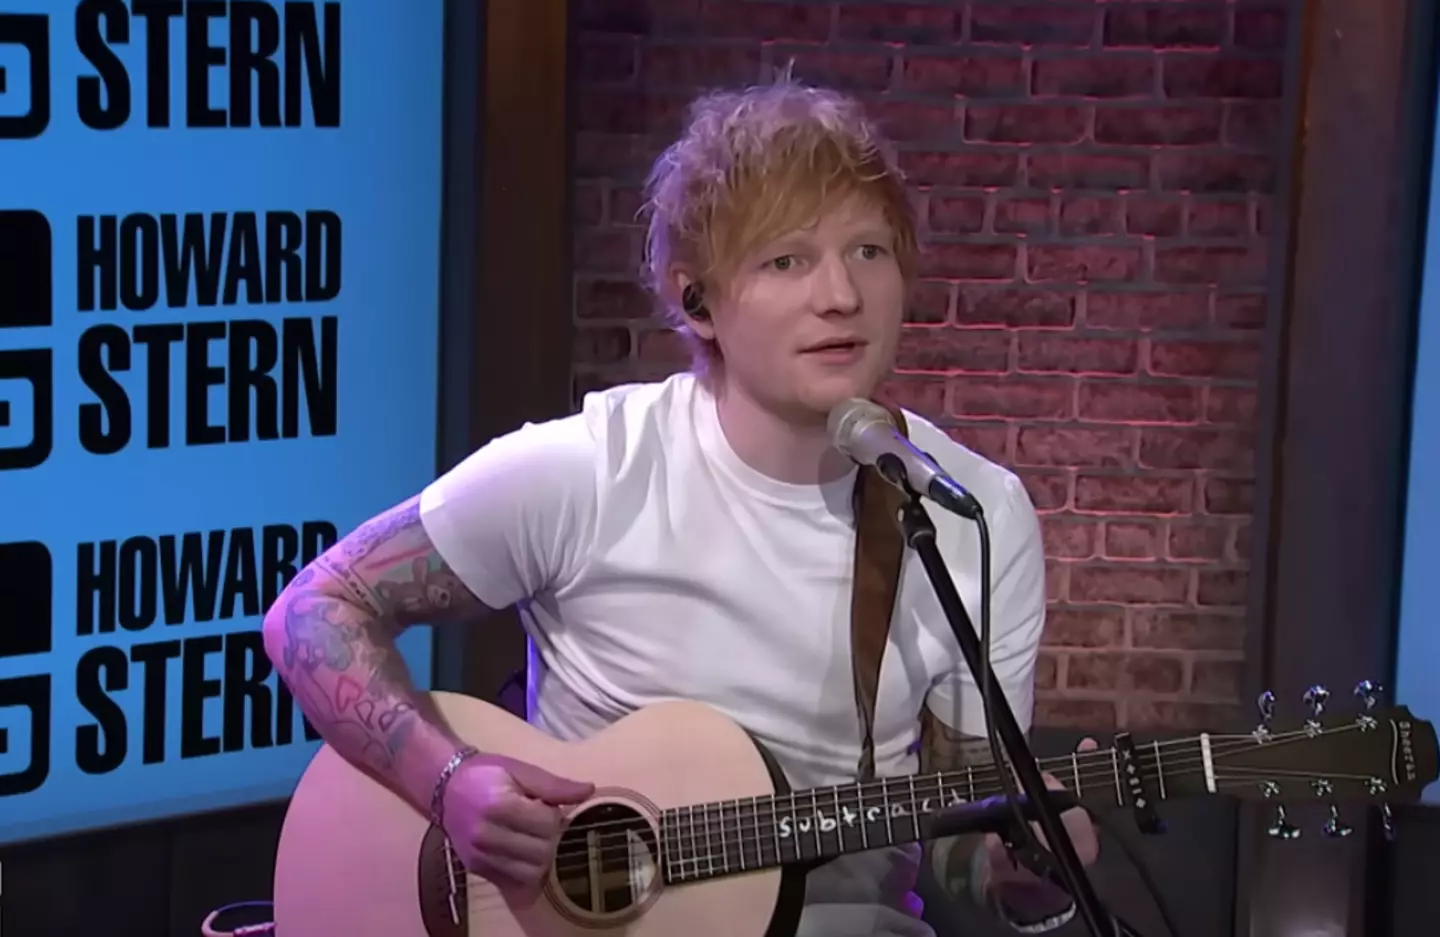 Ed Sheeran said Eminem was responsible for curing his childhood stammer.